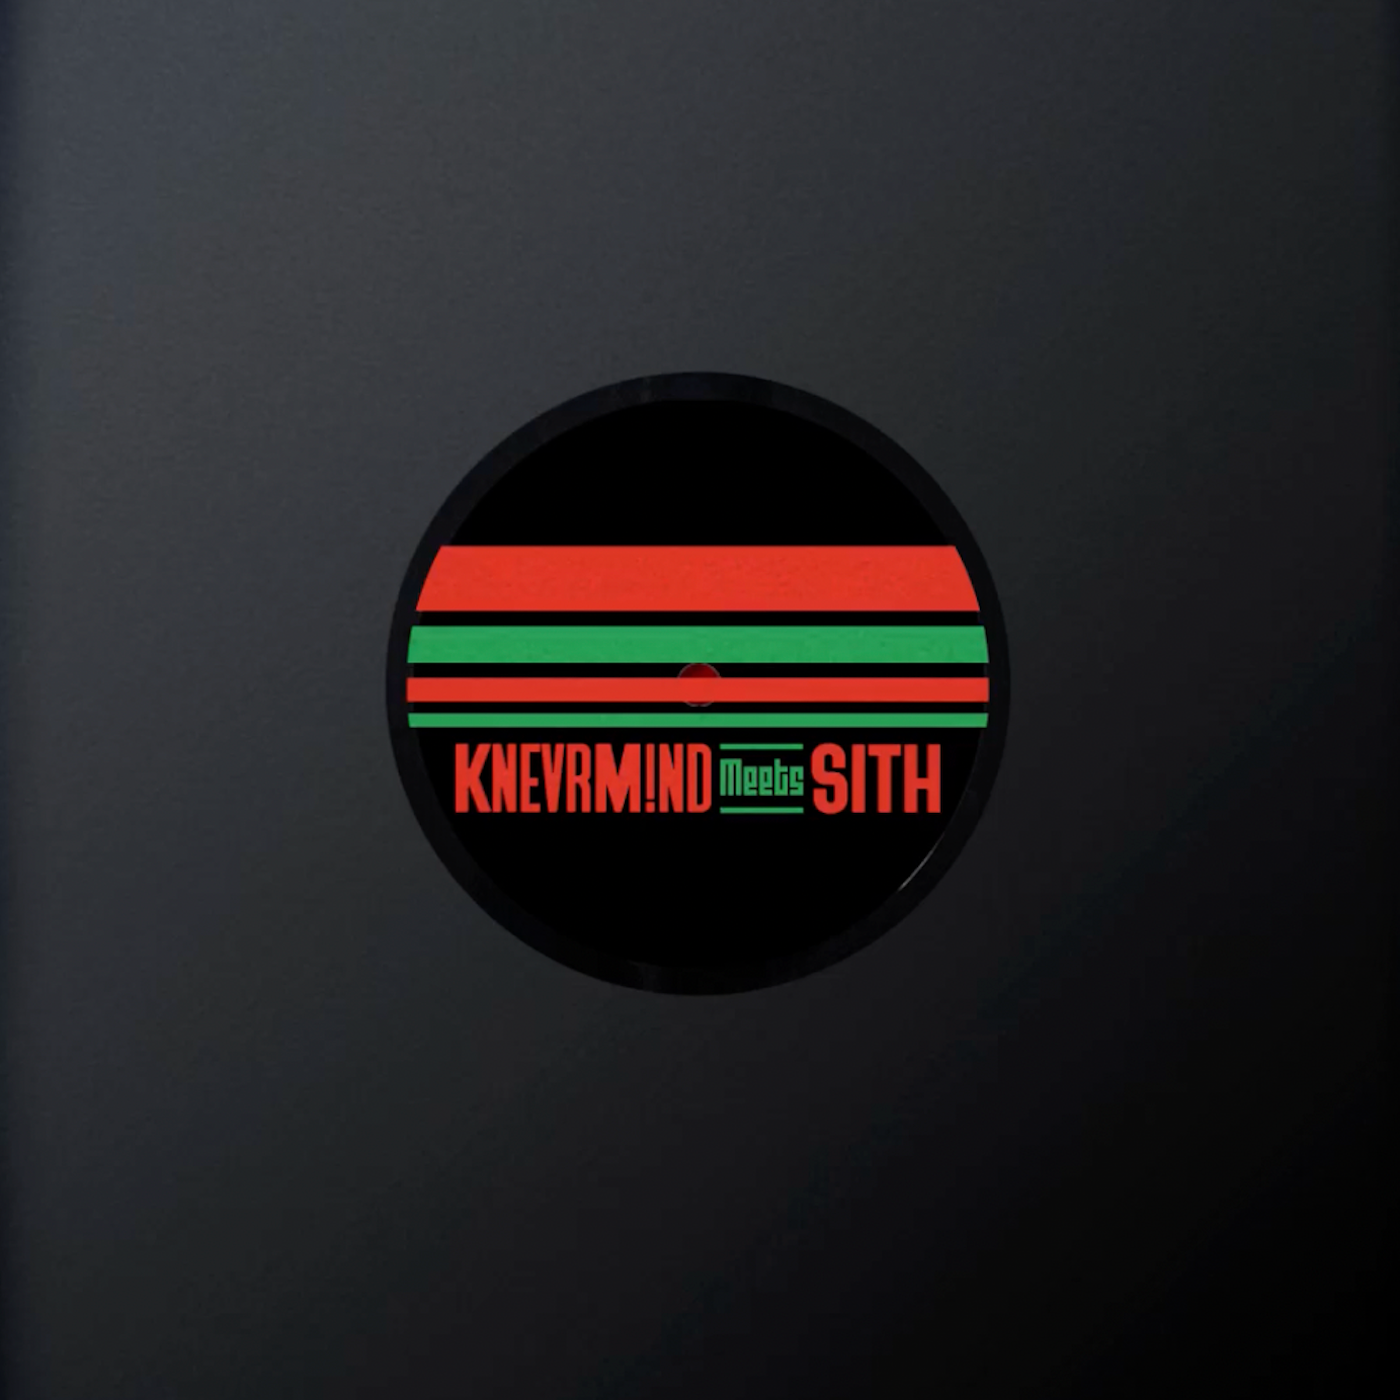 Limited Edition 12" Vinyl - KNEVRM!ND Meets SITH